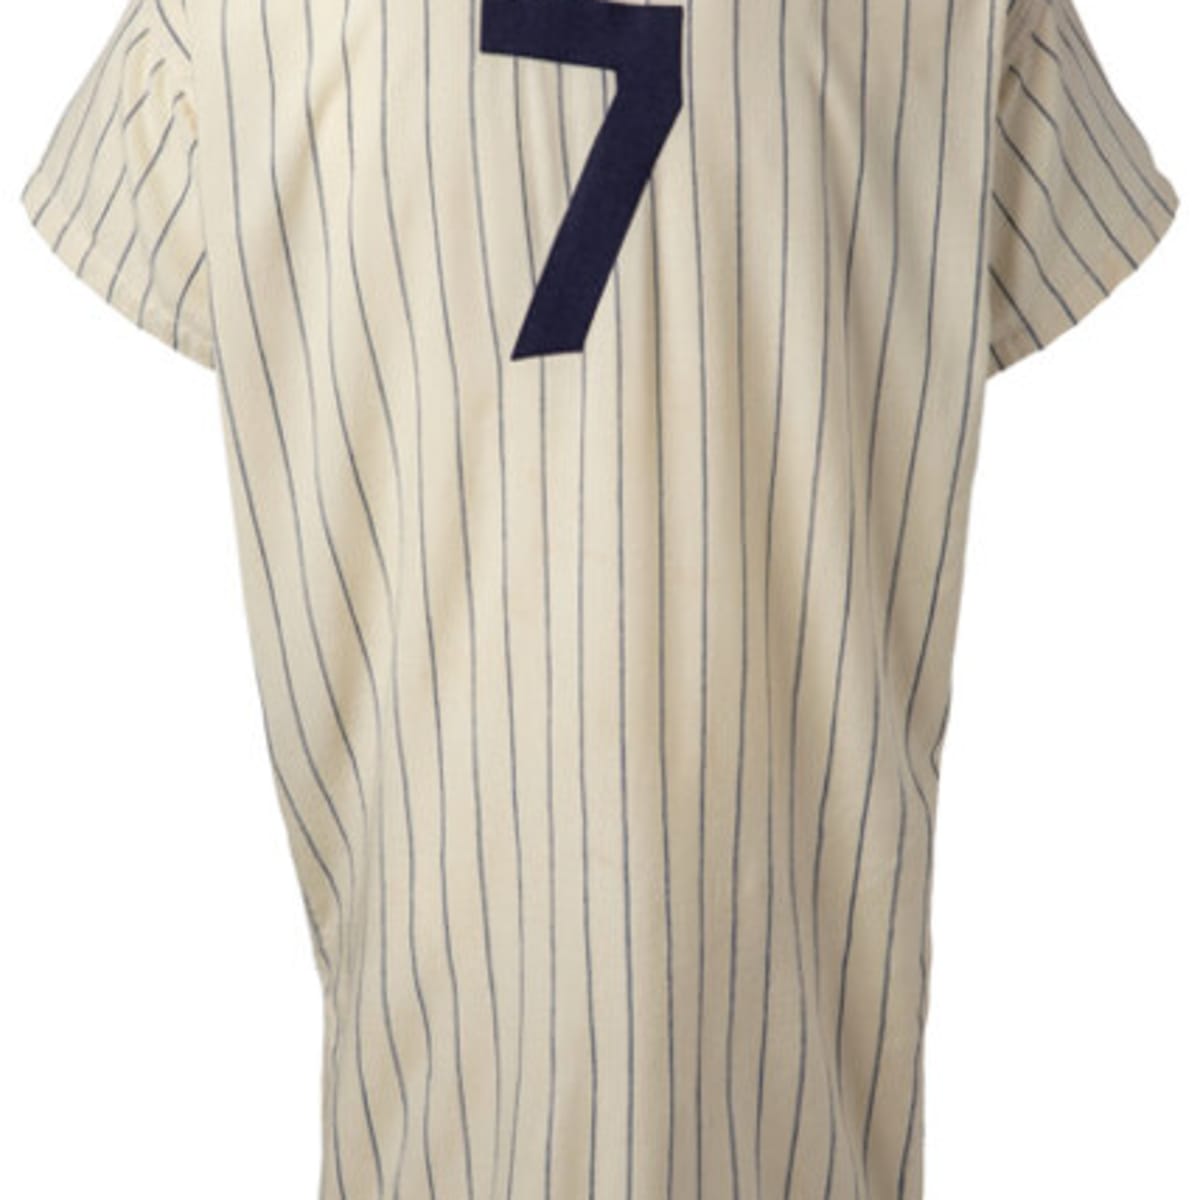 A 1958 game-worn Mickey Mantle jersey sells for record $4.68 million at  auction